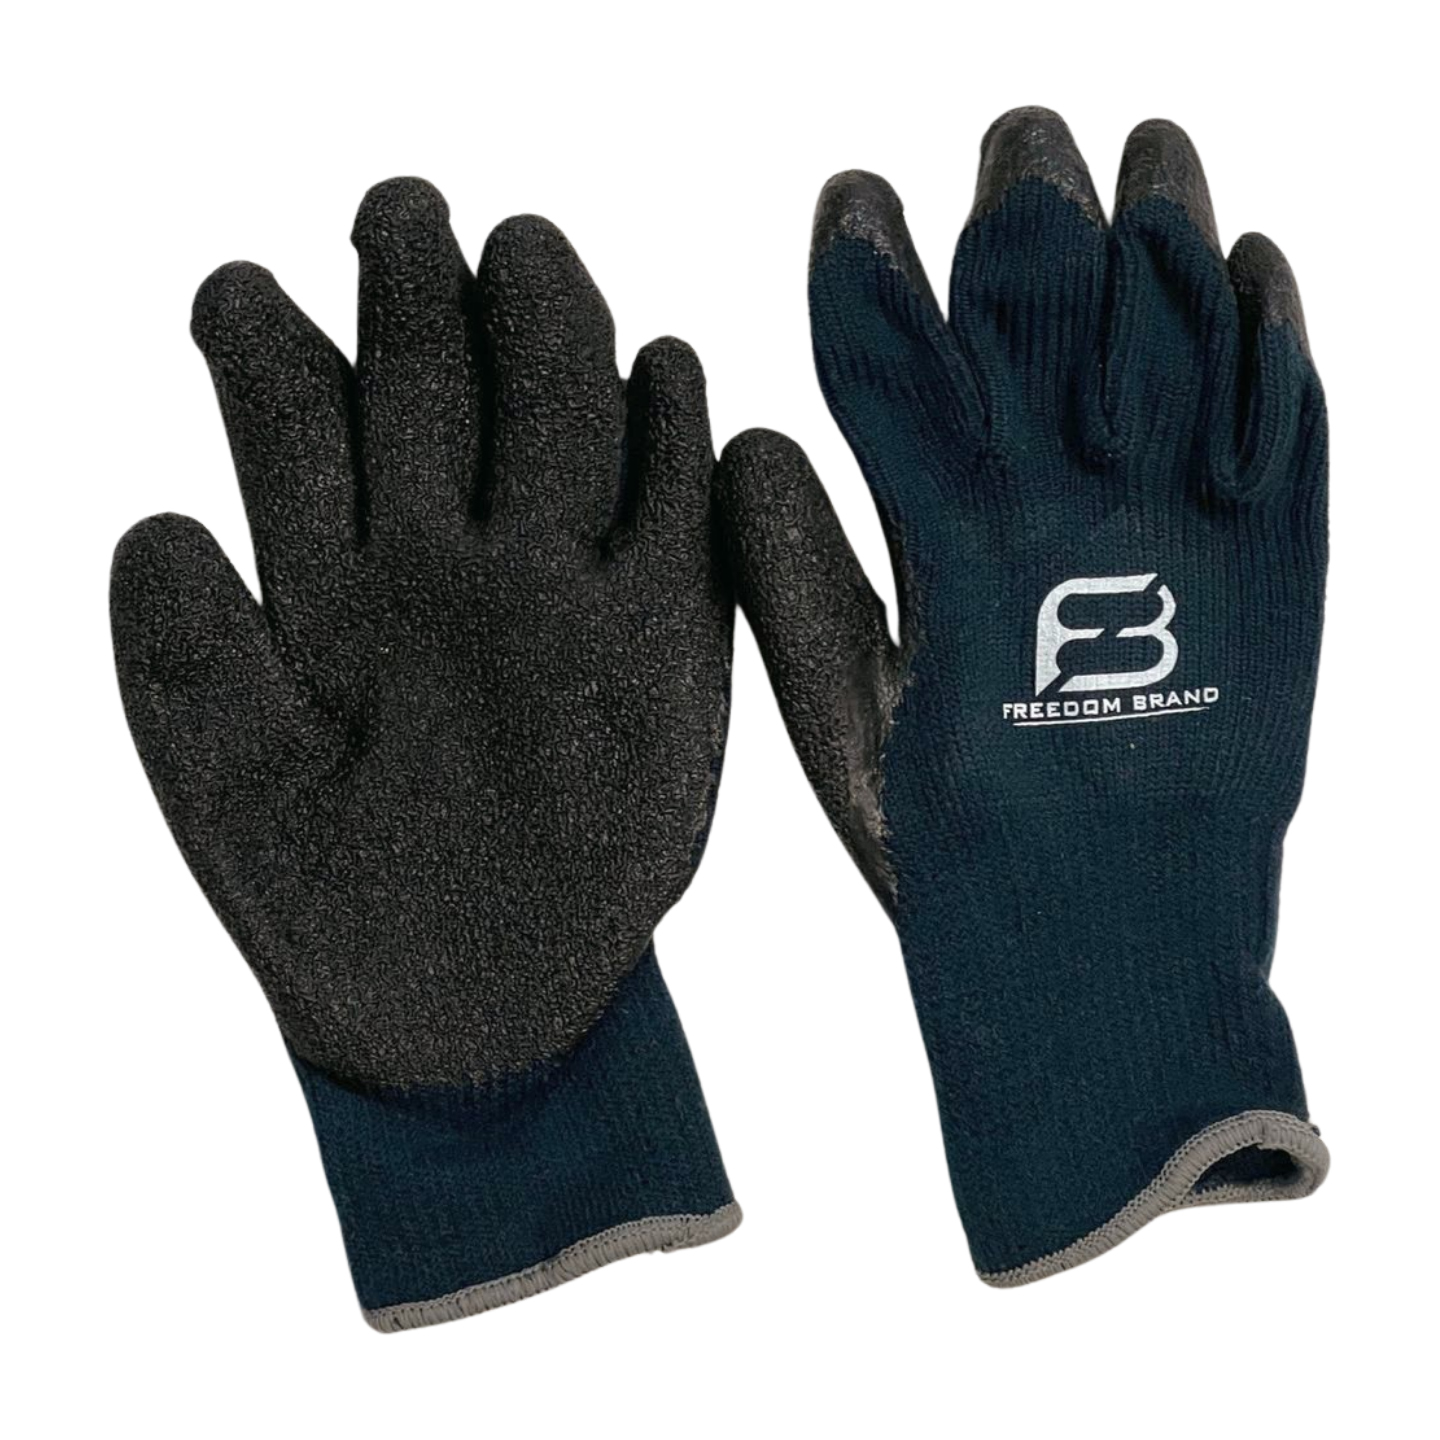 Freedom Brand Land Trapping Gloves